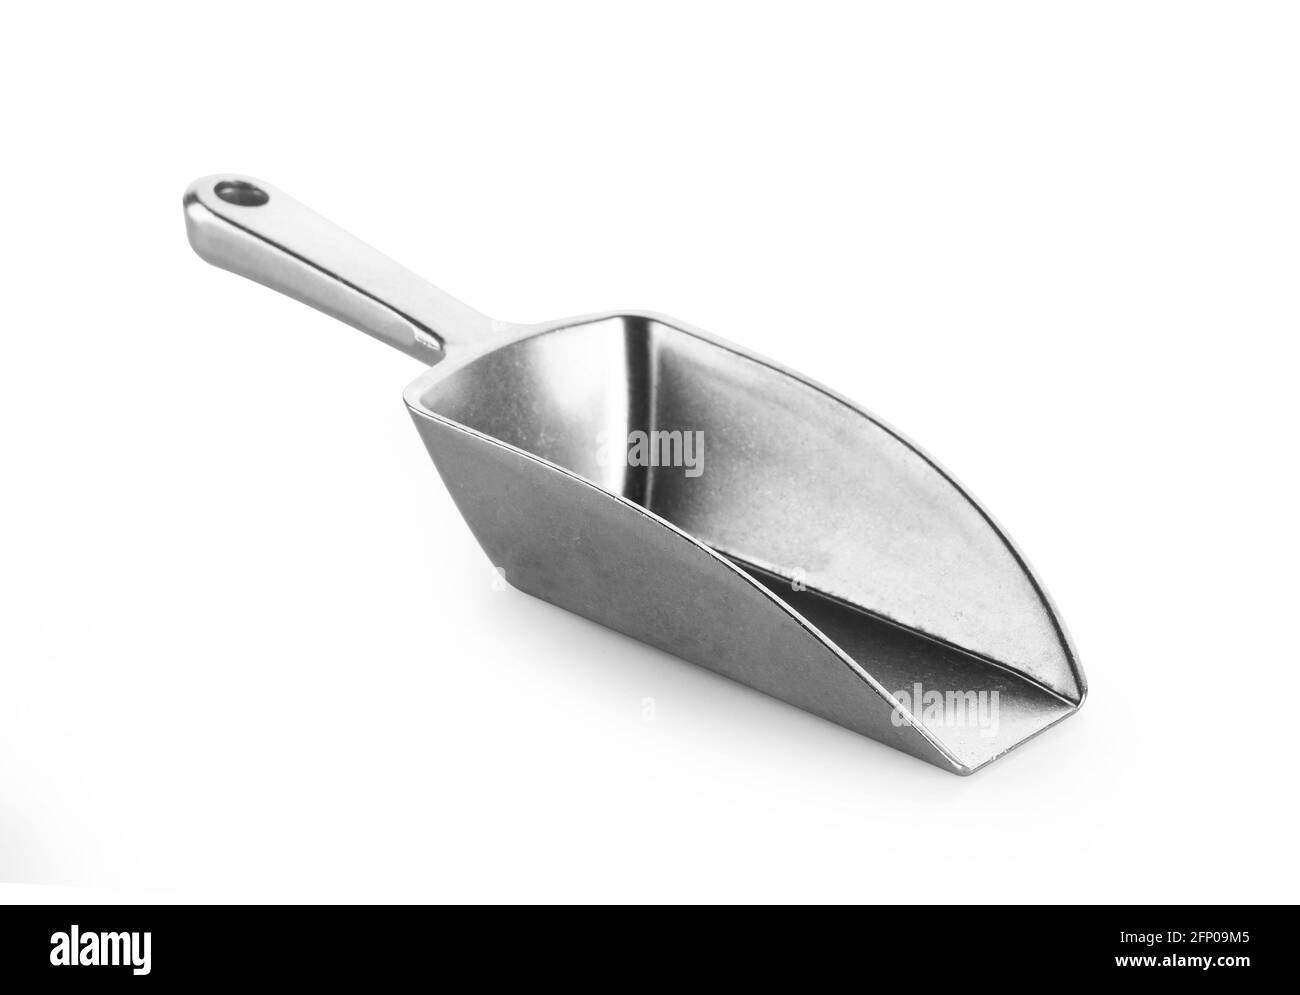 https://c8.alamy.com/comp/2FP09M5/metal-scoop-isolated-on-white-background-2FP09M5.jpg